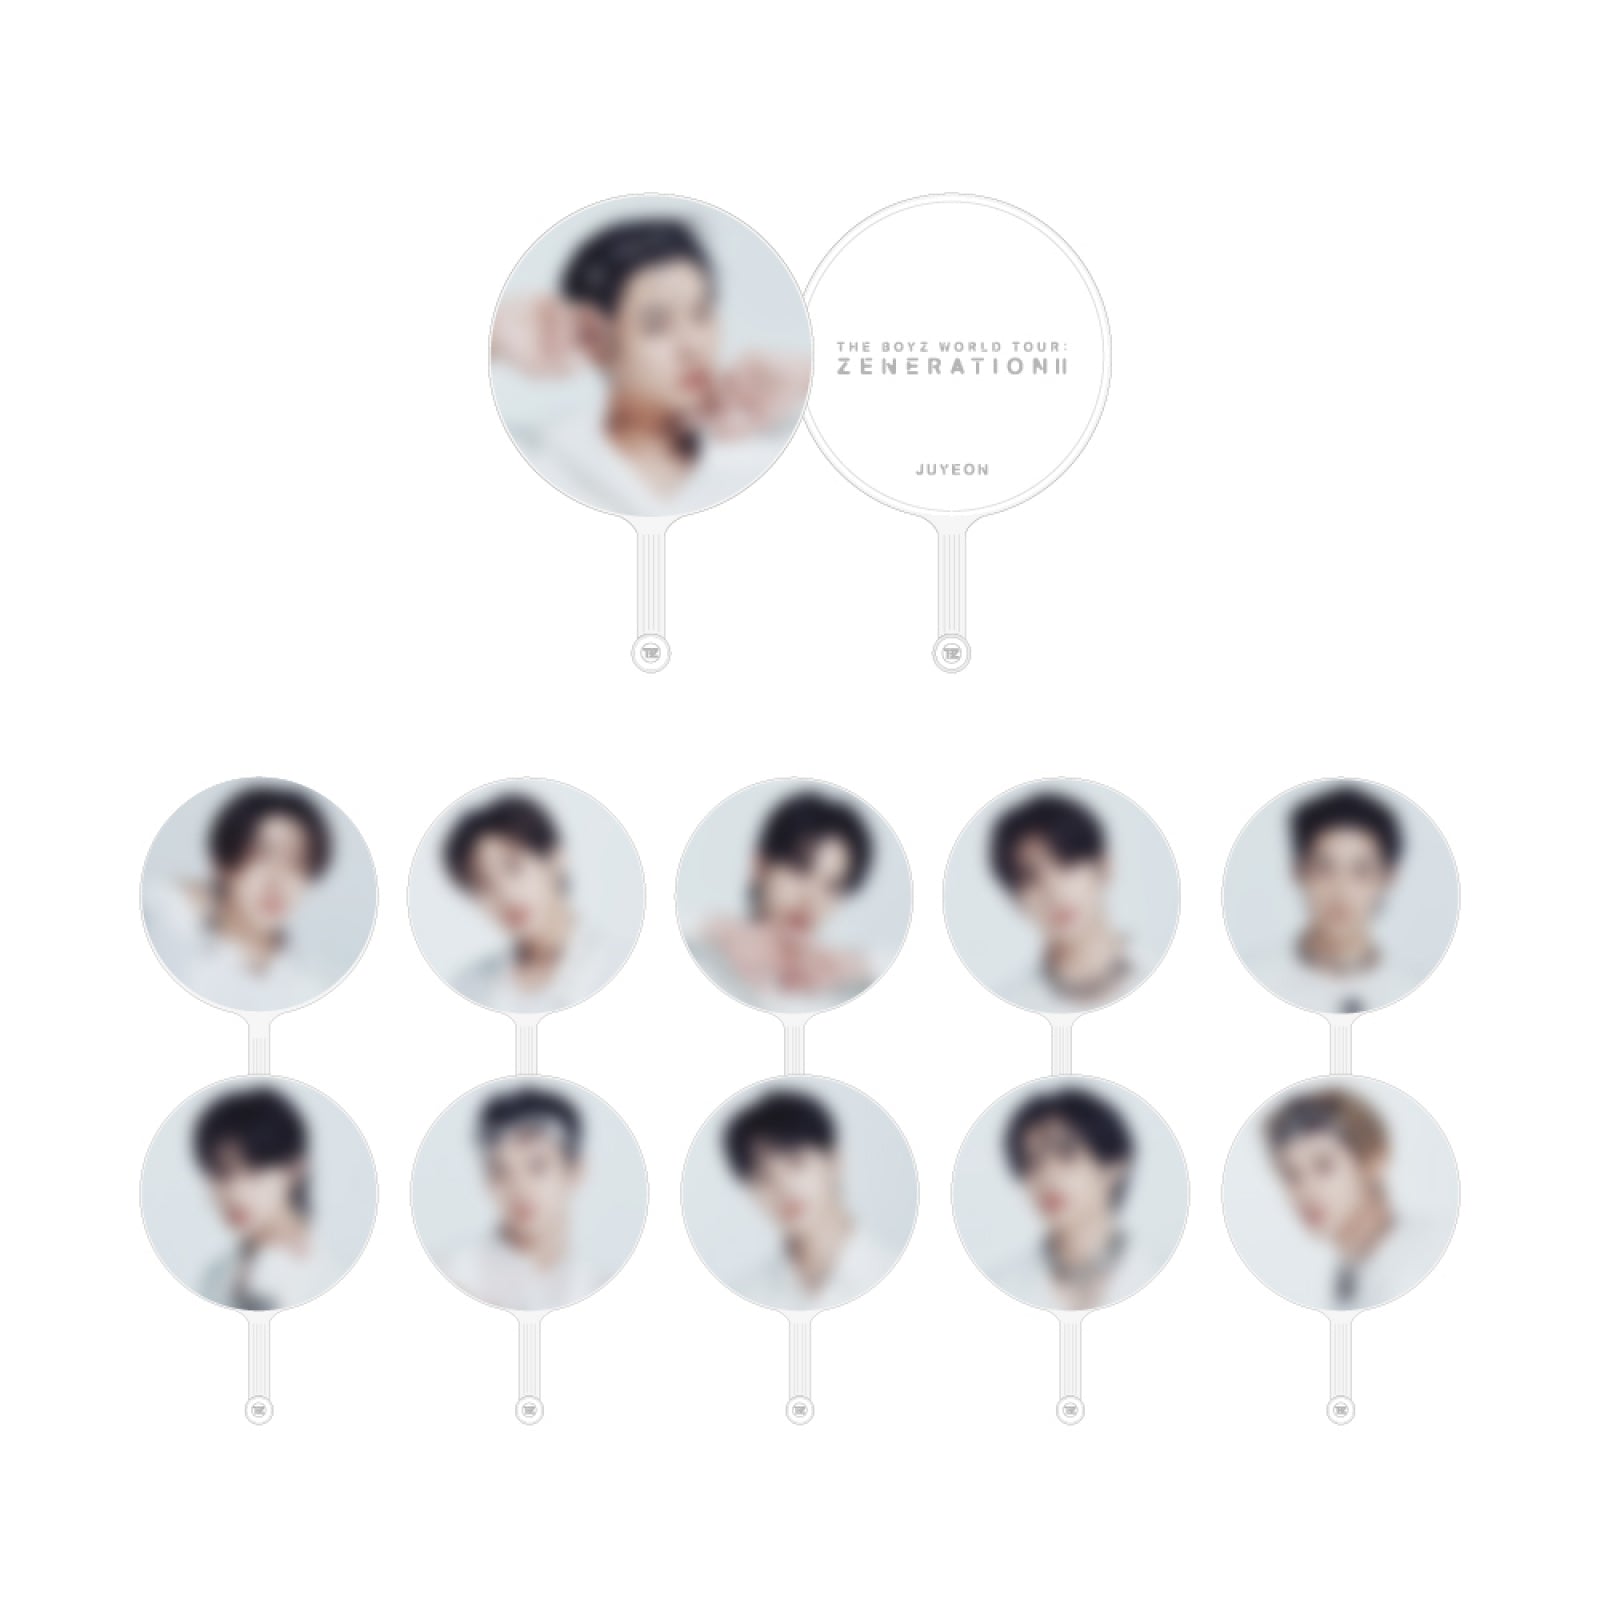 THE BOYZ WORLD TOUR : ZENERATION2 OFFICIAL MD - 12. IMAGE PICKET (PRE-ORDER)